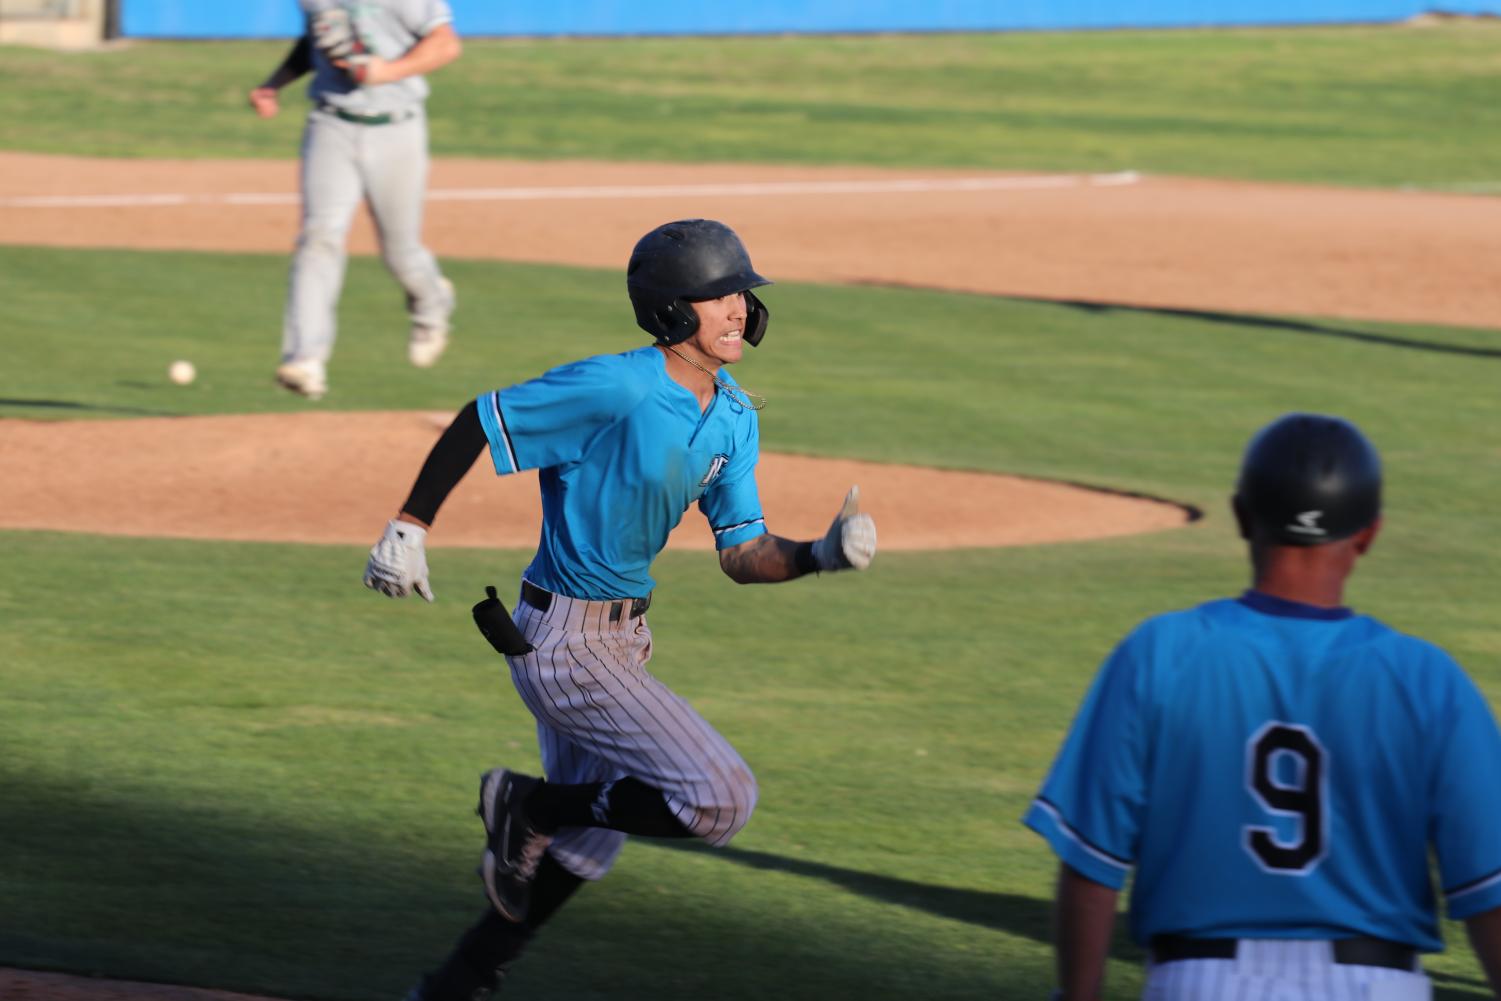 Moorpark Raiders infielder Shane Leong-Grieger hustling down the first base line in a game vs East Los Angeles College on Feb. 8, 2022 in Moorpark, CA. Photo credit: Jack Newman